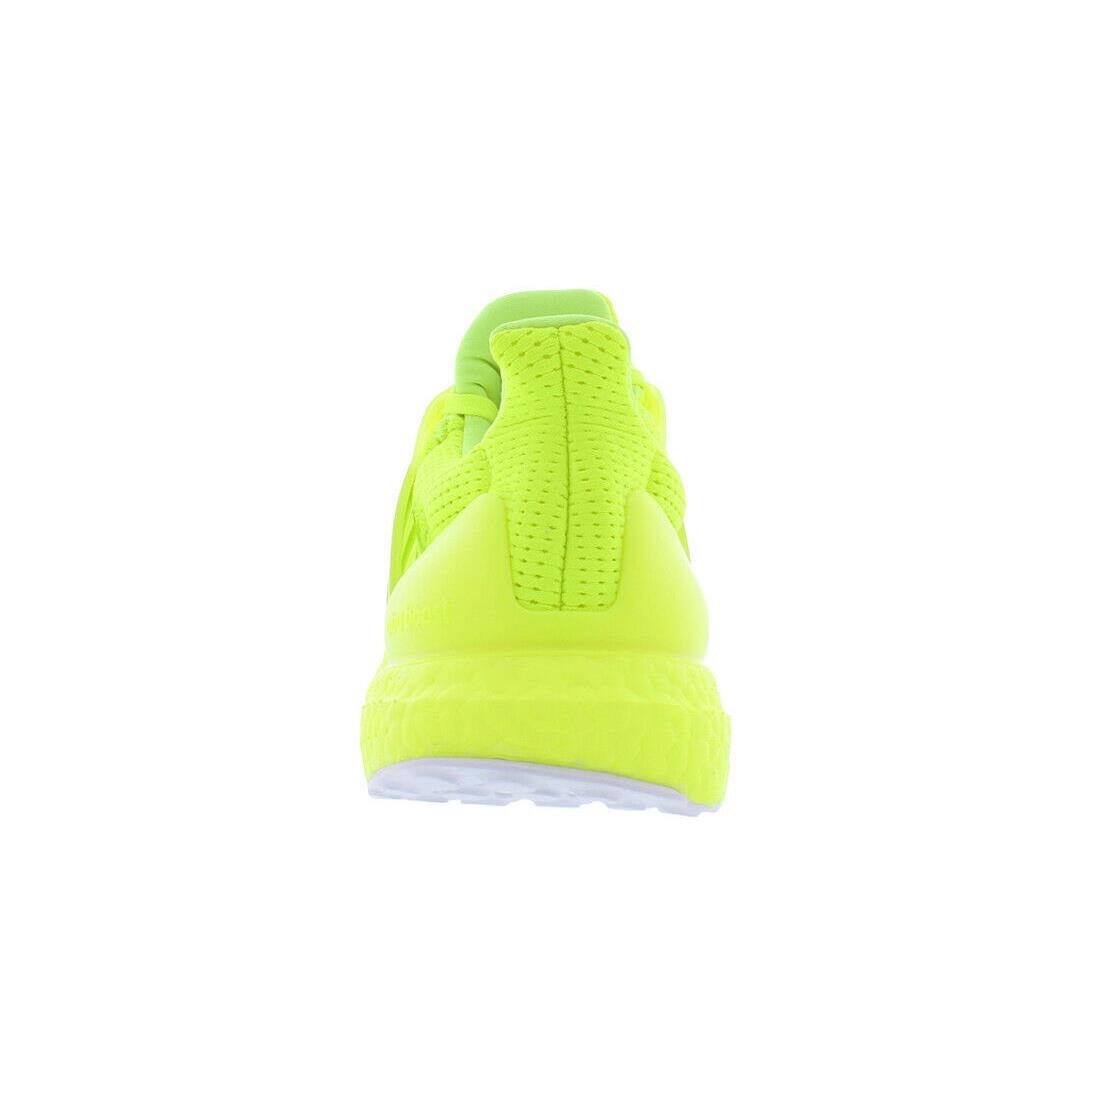 Adidas shoes UltraBoost DNA - Solar Yellow / Solar Yellow / Hi-Res Yellow , Core Black/Core Black/Footwear White Manufacturer 5